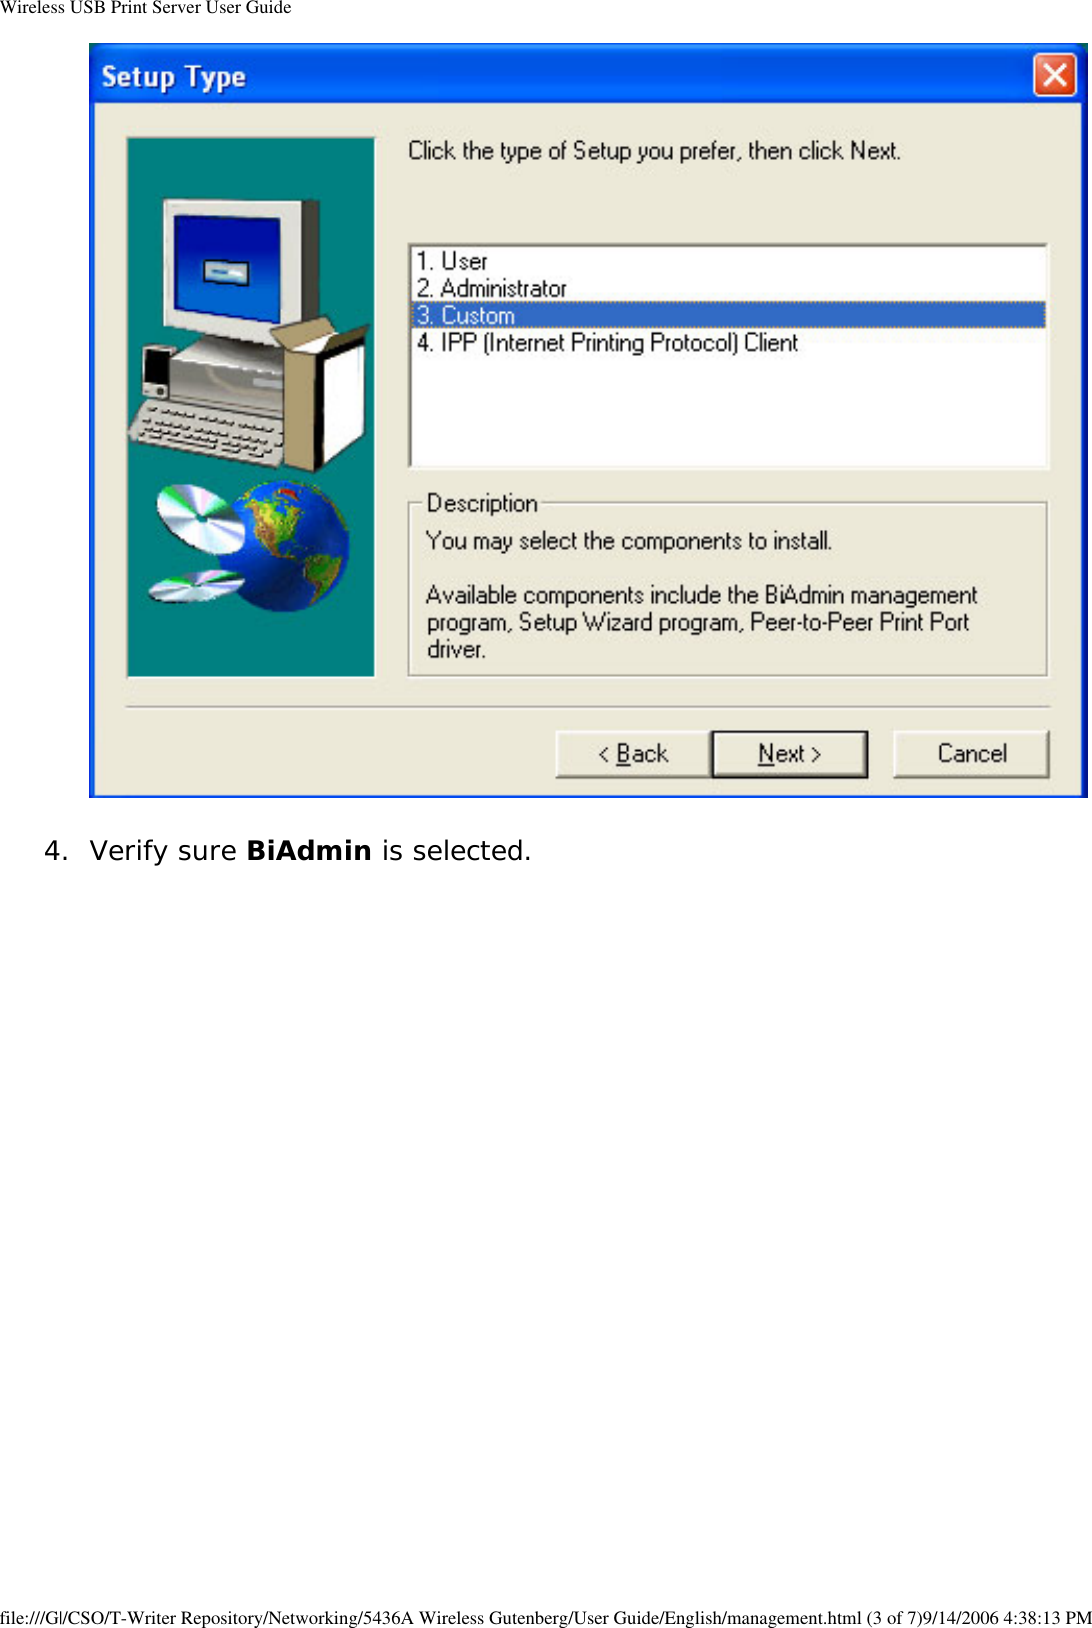 Wireless USB Print Server User Guide 4.  Verify sure BiAdmin is selected.   file:///G|/CSO/T-Writer Repository/Networking/5436A Wireless Gutenberg/User Guide/English/management.html (3 of 7)9/14/2006 4:38:13 PM